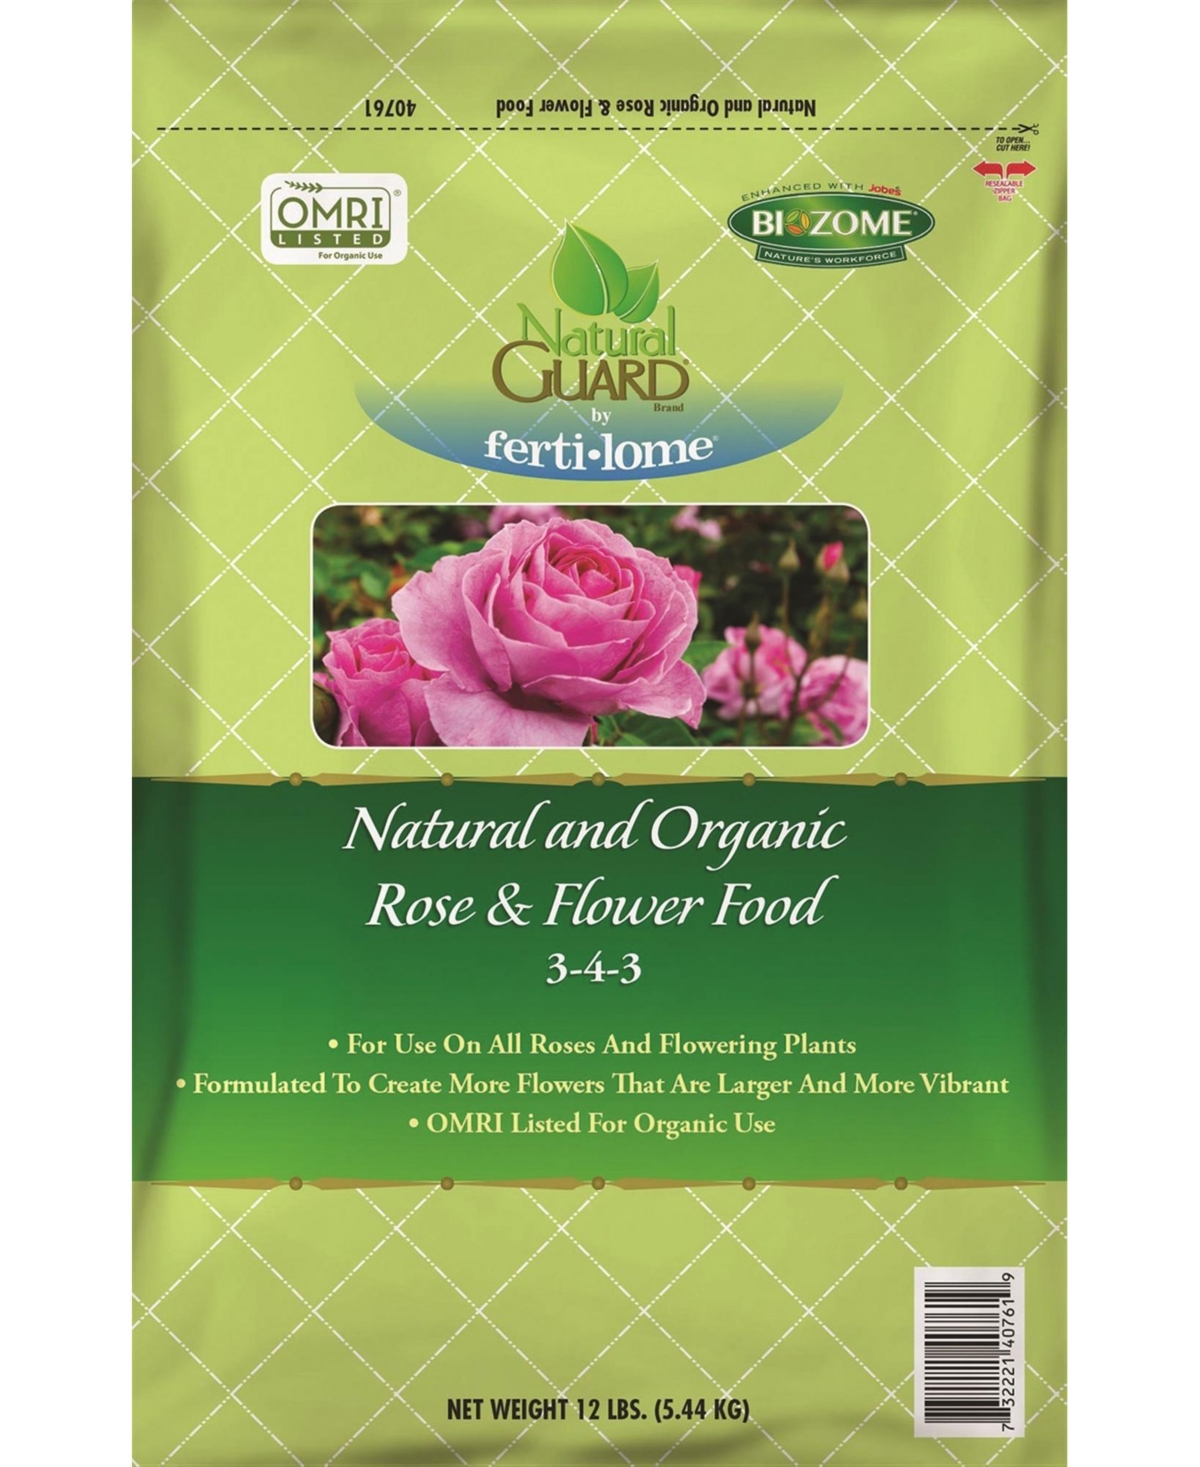 Natural Guard Natural Rose and Flower Food 3-4-3, 12 Lb - Open Miscellaneous